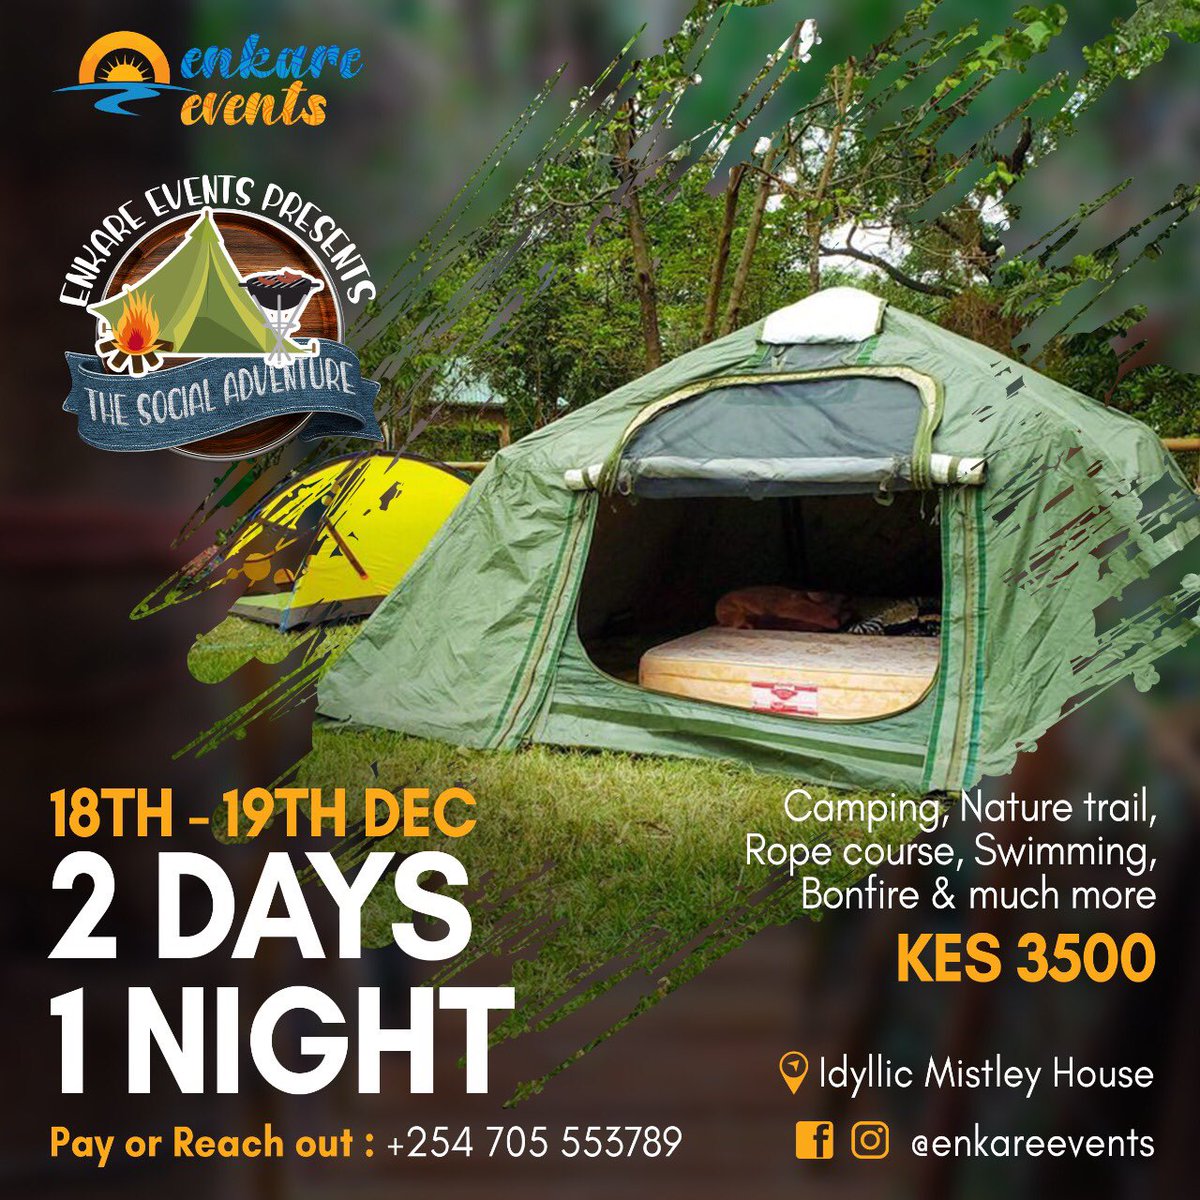 Limited Slots Left. Book the social adventure of the month | 2 Days | 1 Night.
Call +254 705 553 789 for more info.⁣
.⁣
.⁣
.⁣
.⁣
.⁣

#gainwithmchina #gainwithcolonel
#gainwithfinessengara #gainwithtashamuthoni #gainwithxtiandela #gainwithspikes #gainwithlarrymemes